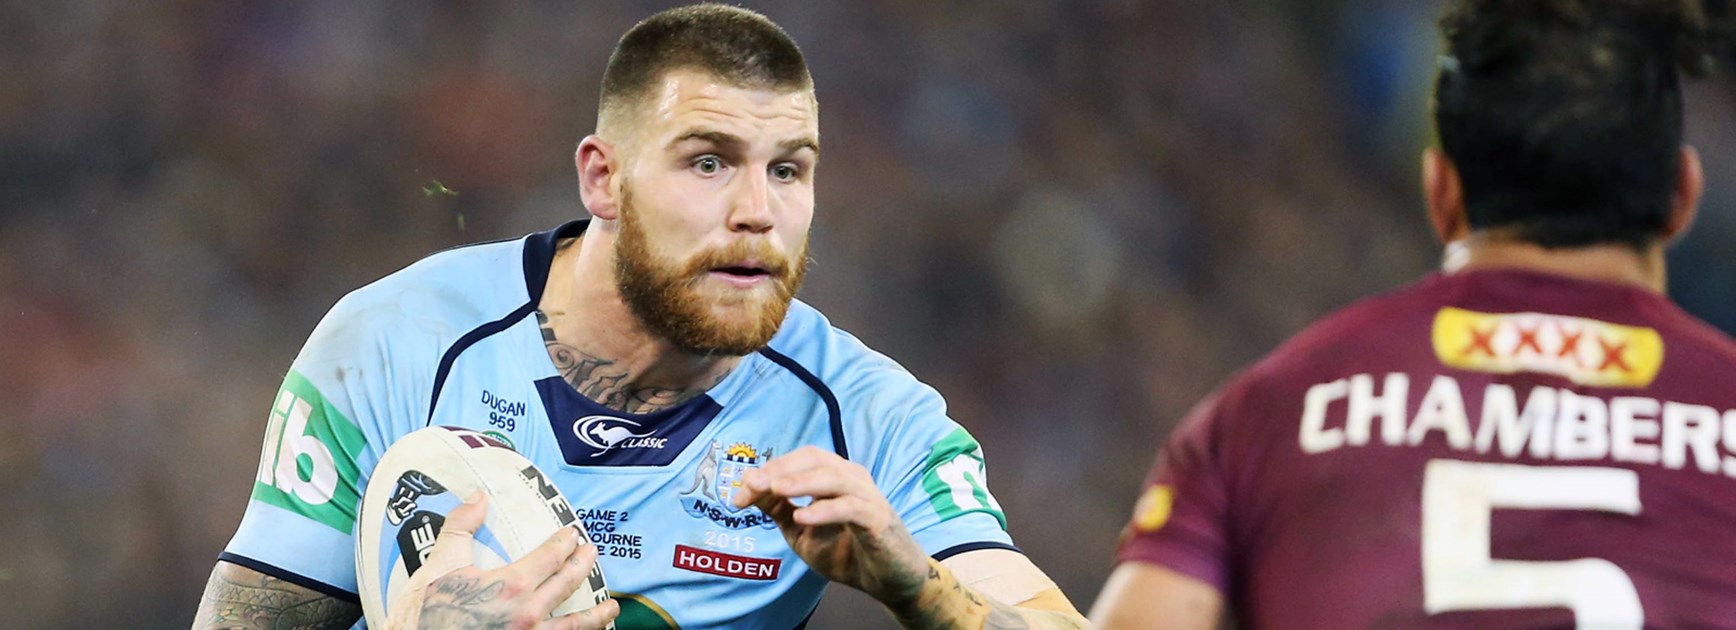 Maroons legends have claimed Josh Dugan is the man Queensland must stop in the 2015 decider.